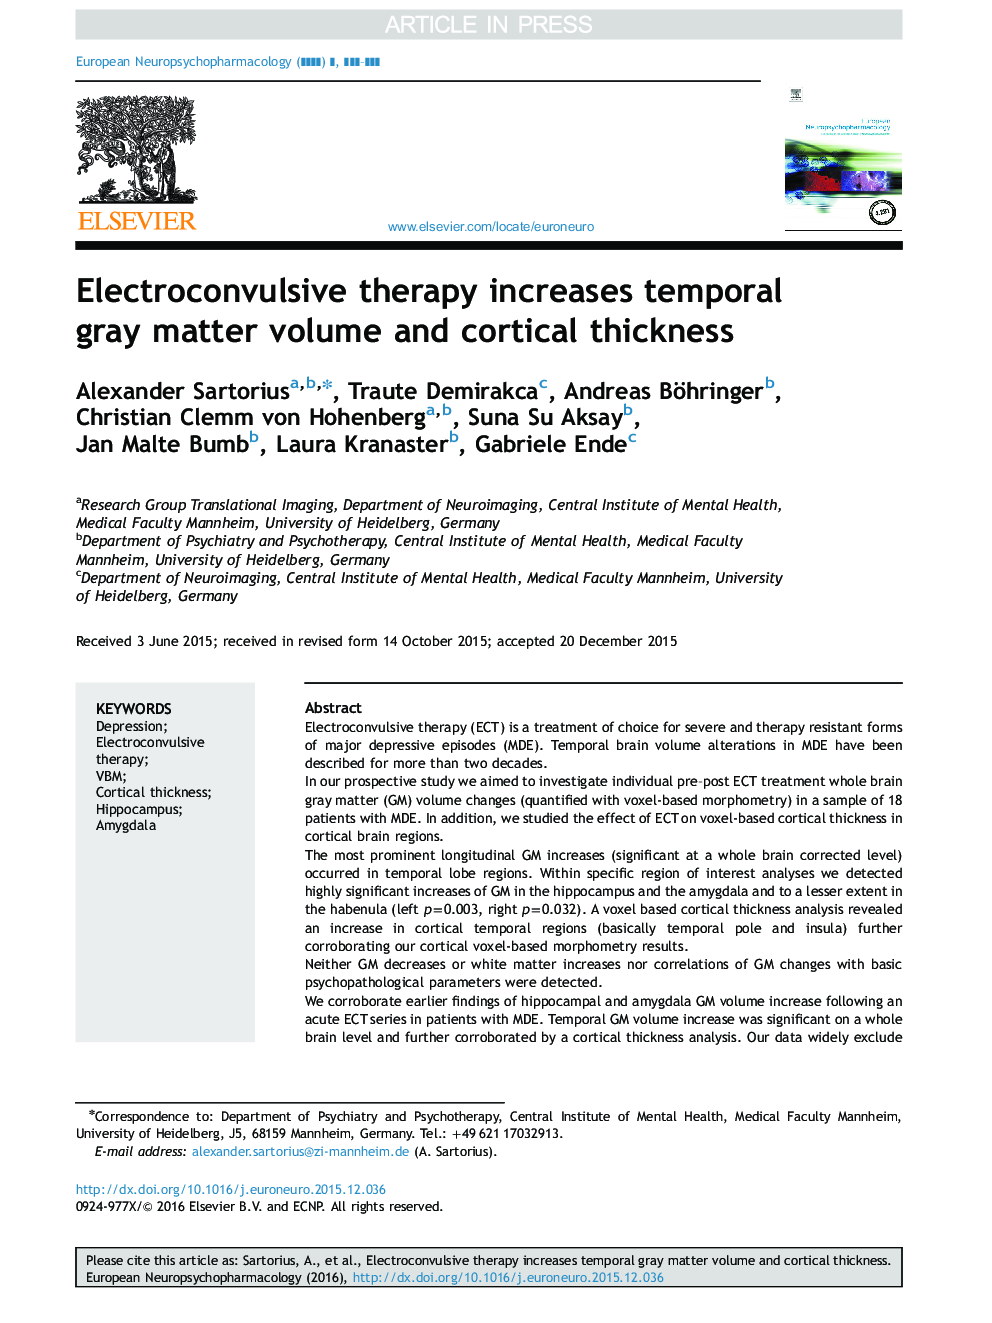 Electroconvulsive therapy increases temporal gray matter volume and cortical thickness